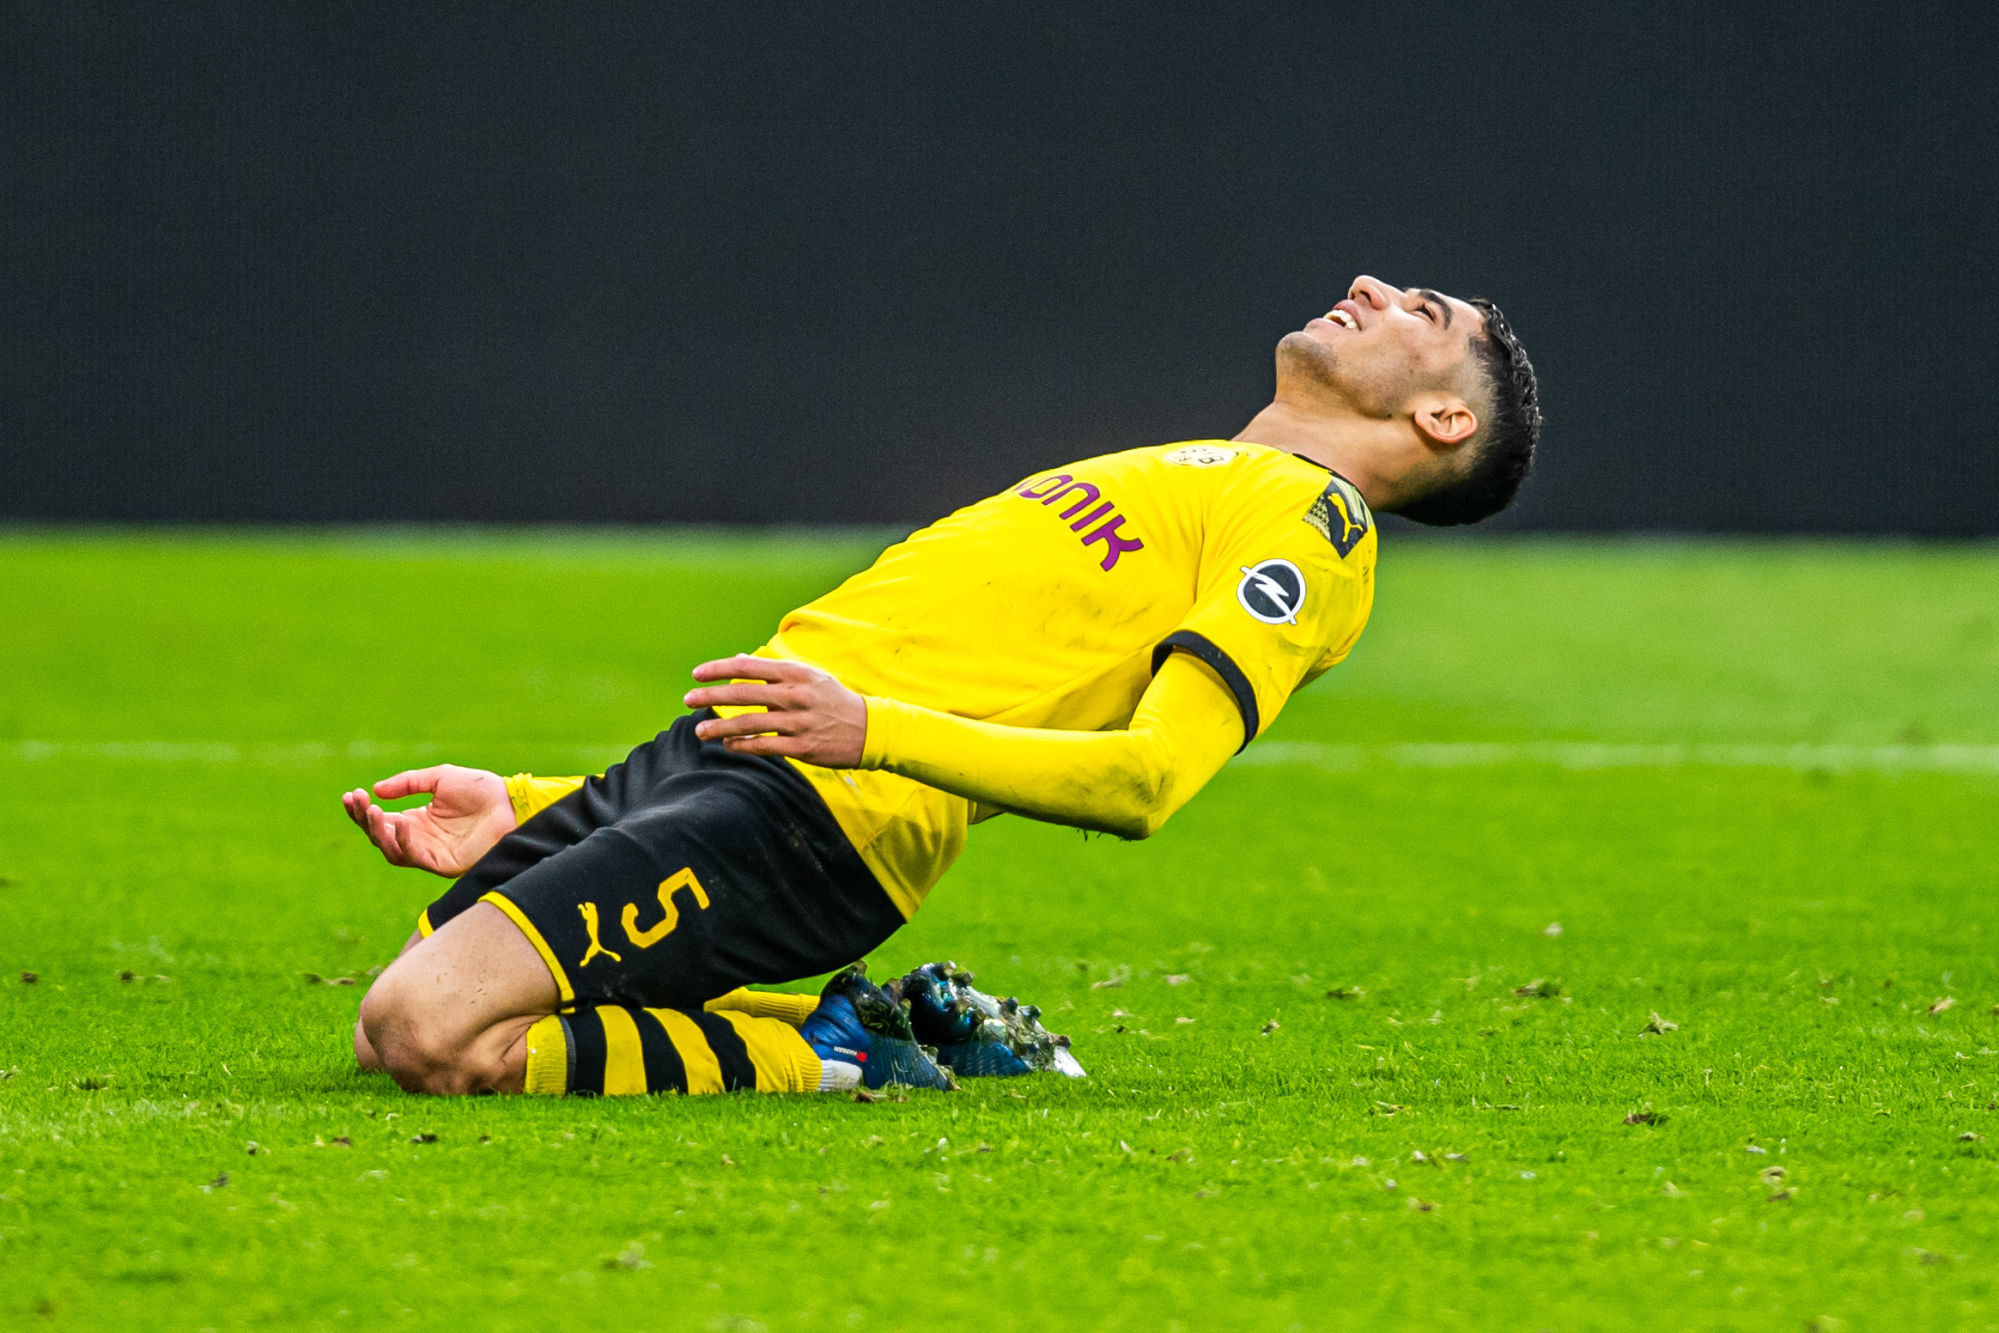 29 February 2020, North Rhine-Westphalia, Dortmund: Football: Bundesliga, Borussia Dortmund - SC Freiburg, 24th matchday, at Signal-Iduna-Park. Dortmund's Achraf Hakimi lies disappointed on the lawn. Photo: David Inderlied/dpa - IMPORTANT NOTE: In accordance with the regulations of the DFL Deutsche Fu?ball Liga and the DFB Deutscher Fu?ball-Bund, it is prohibited to exploit or have exploited in the stadium and/or from the game taken photographs in the form of sequence images and/or video-like photo series. 

Photo by Icon Sport - Achraf HAKIMI - Signal Iduna Park - Dortmund (Allemagne)